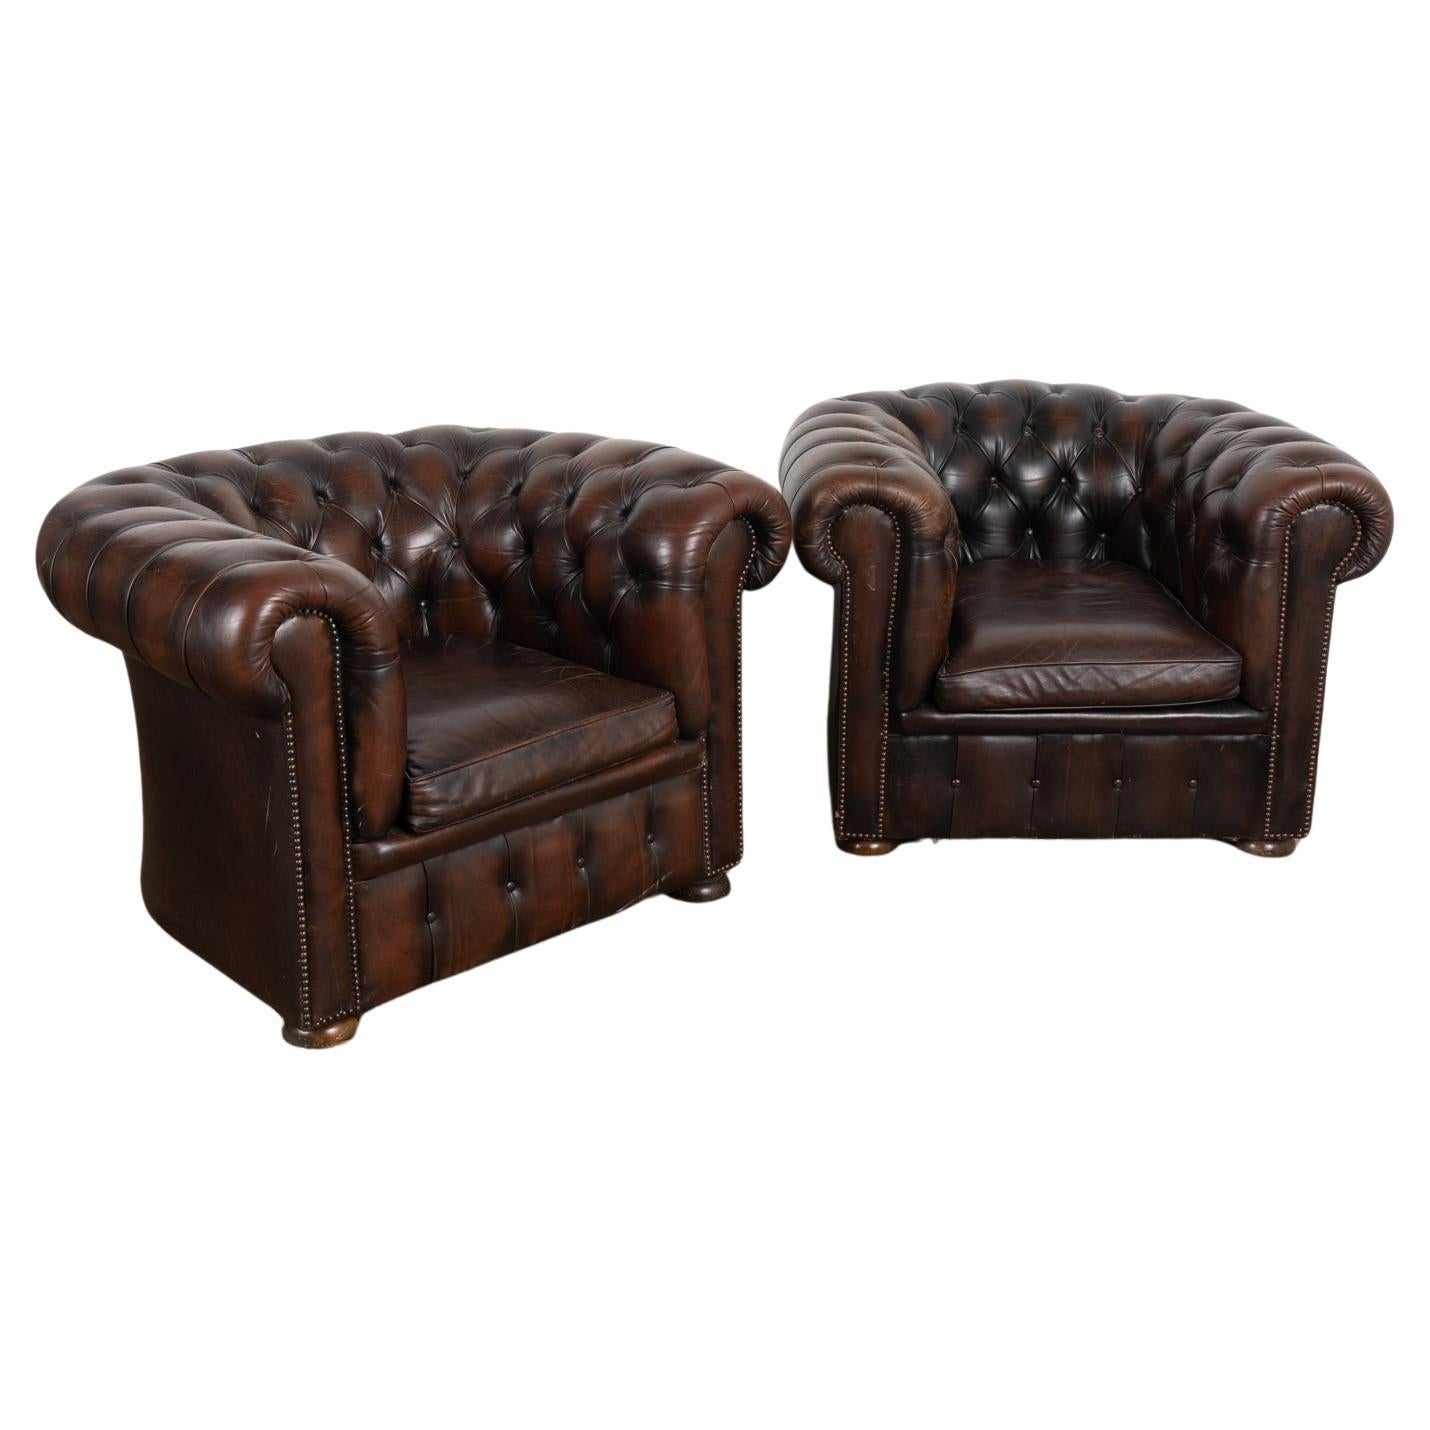 Pair, Chesterfield Brown Leather Armchair Club Chairs, Denmark circa 1940-60 For Sale